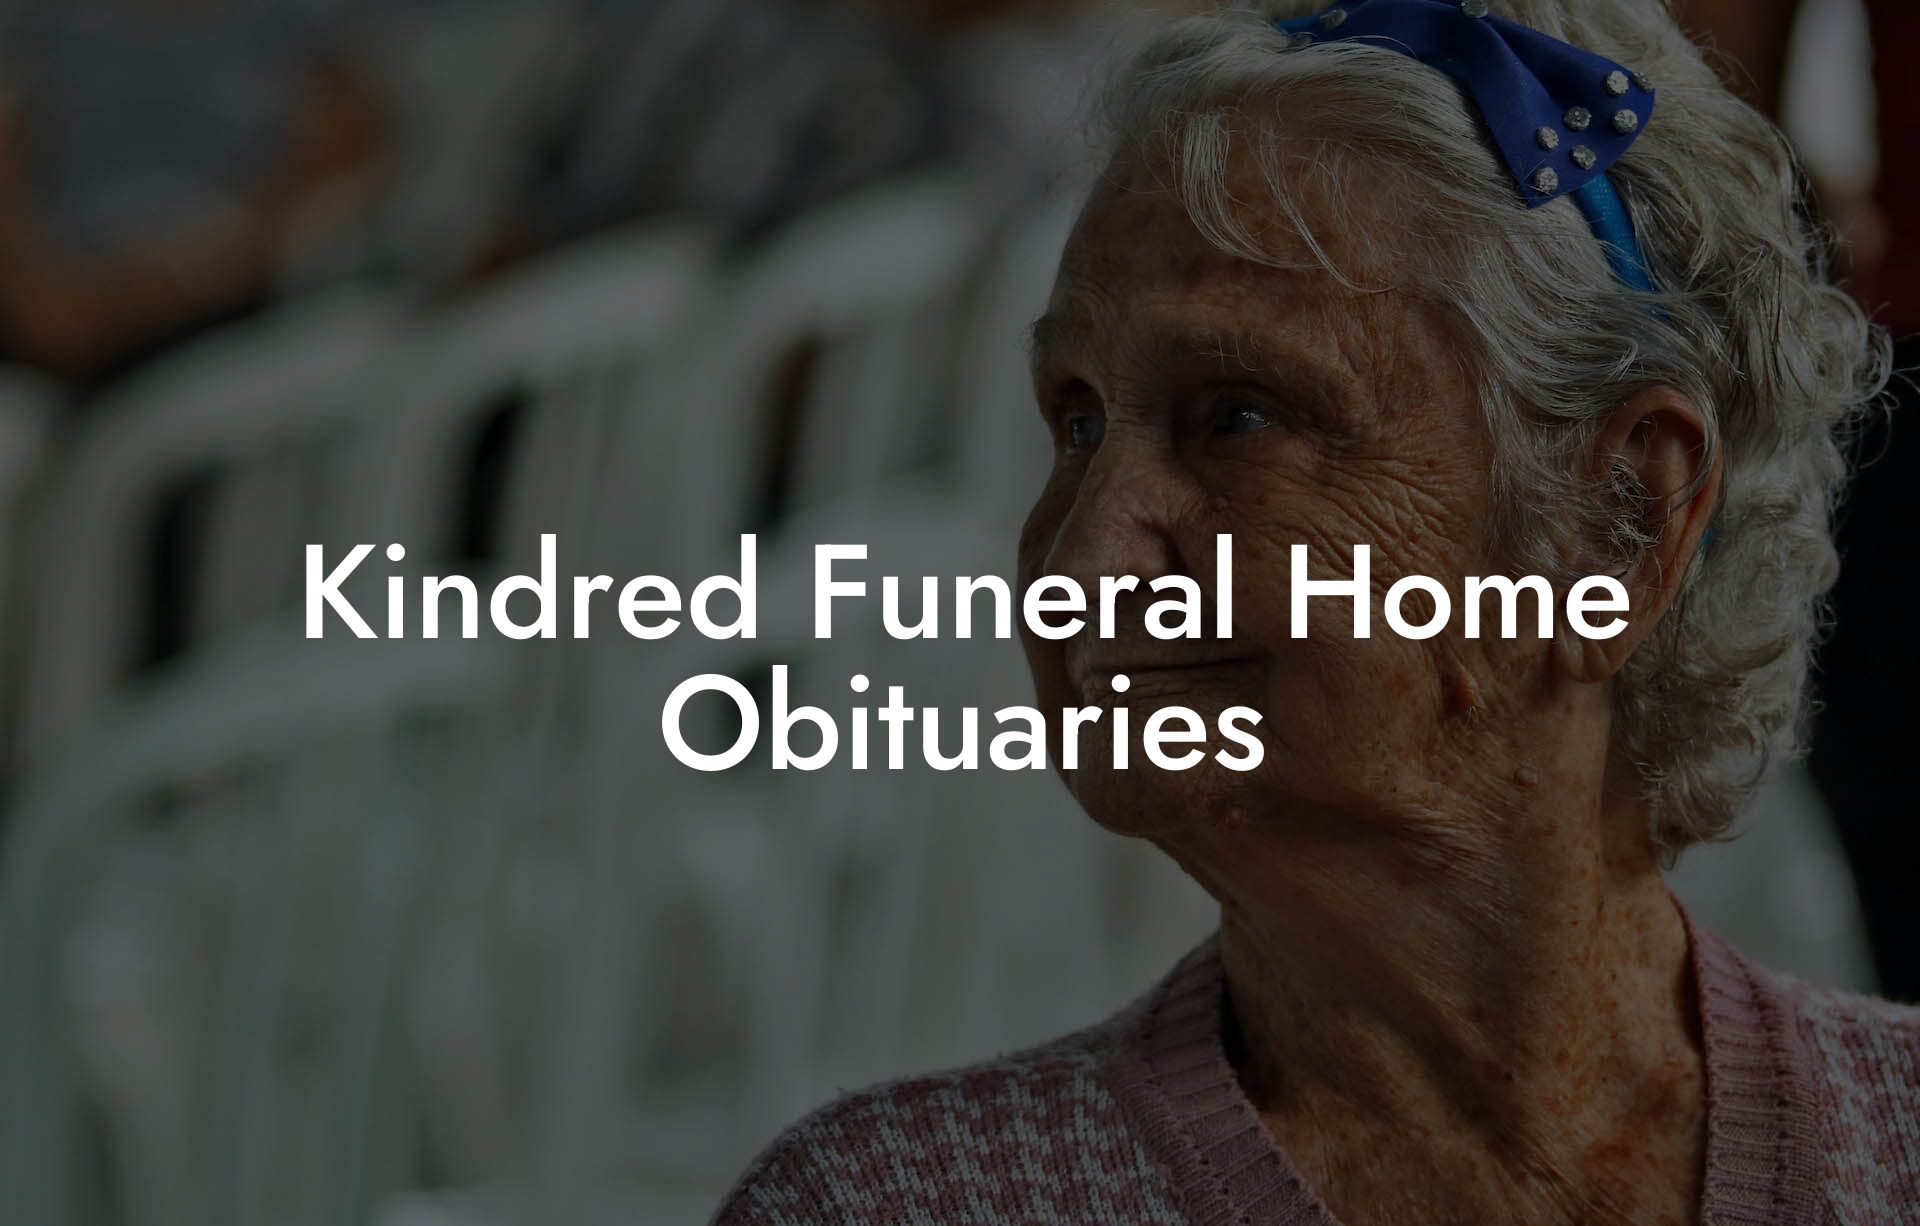 Kindred Funeral Home Obituaries